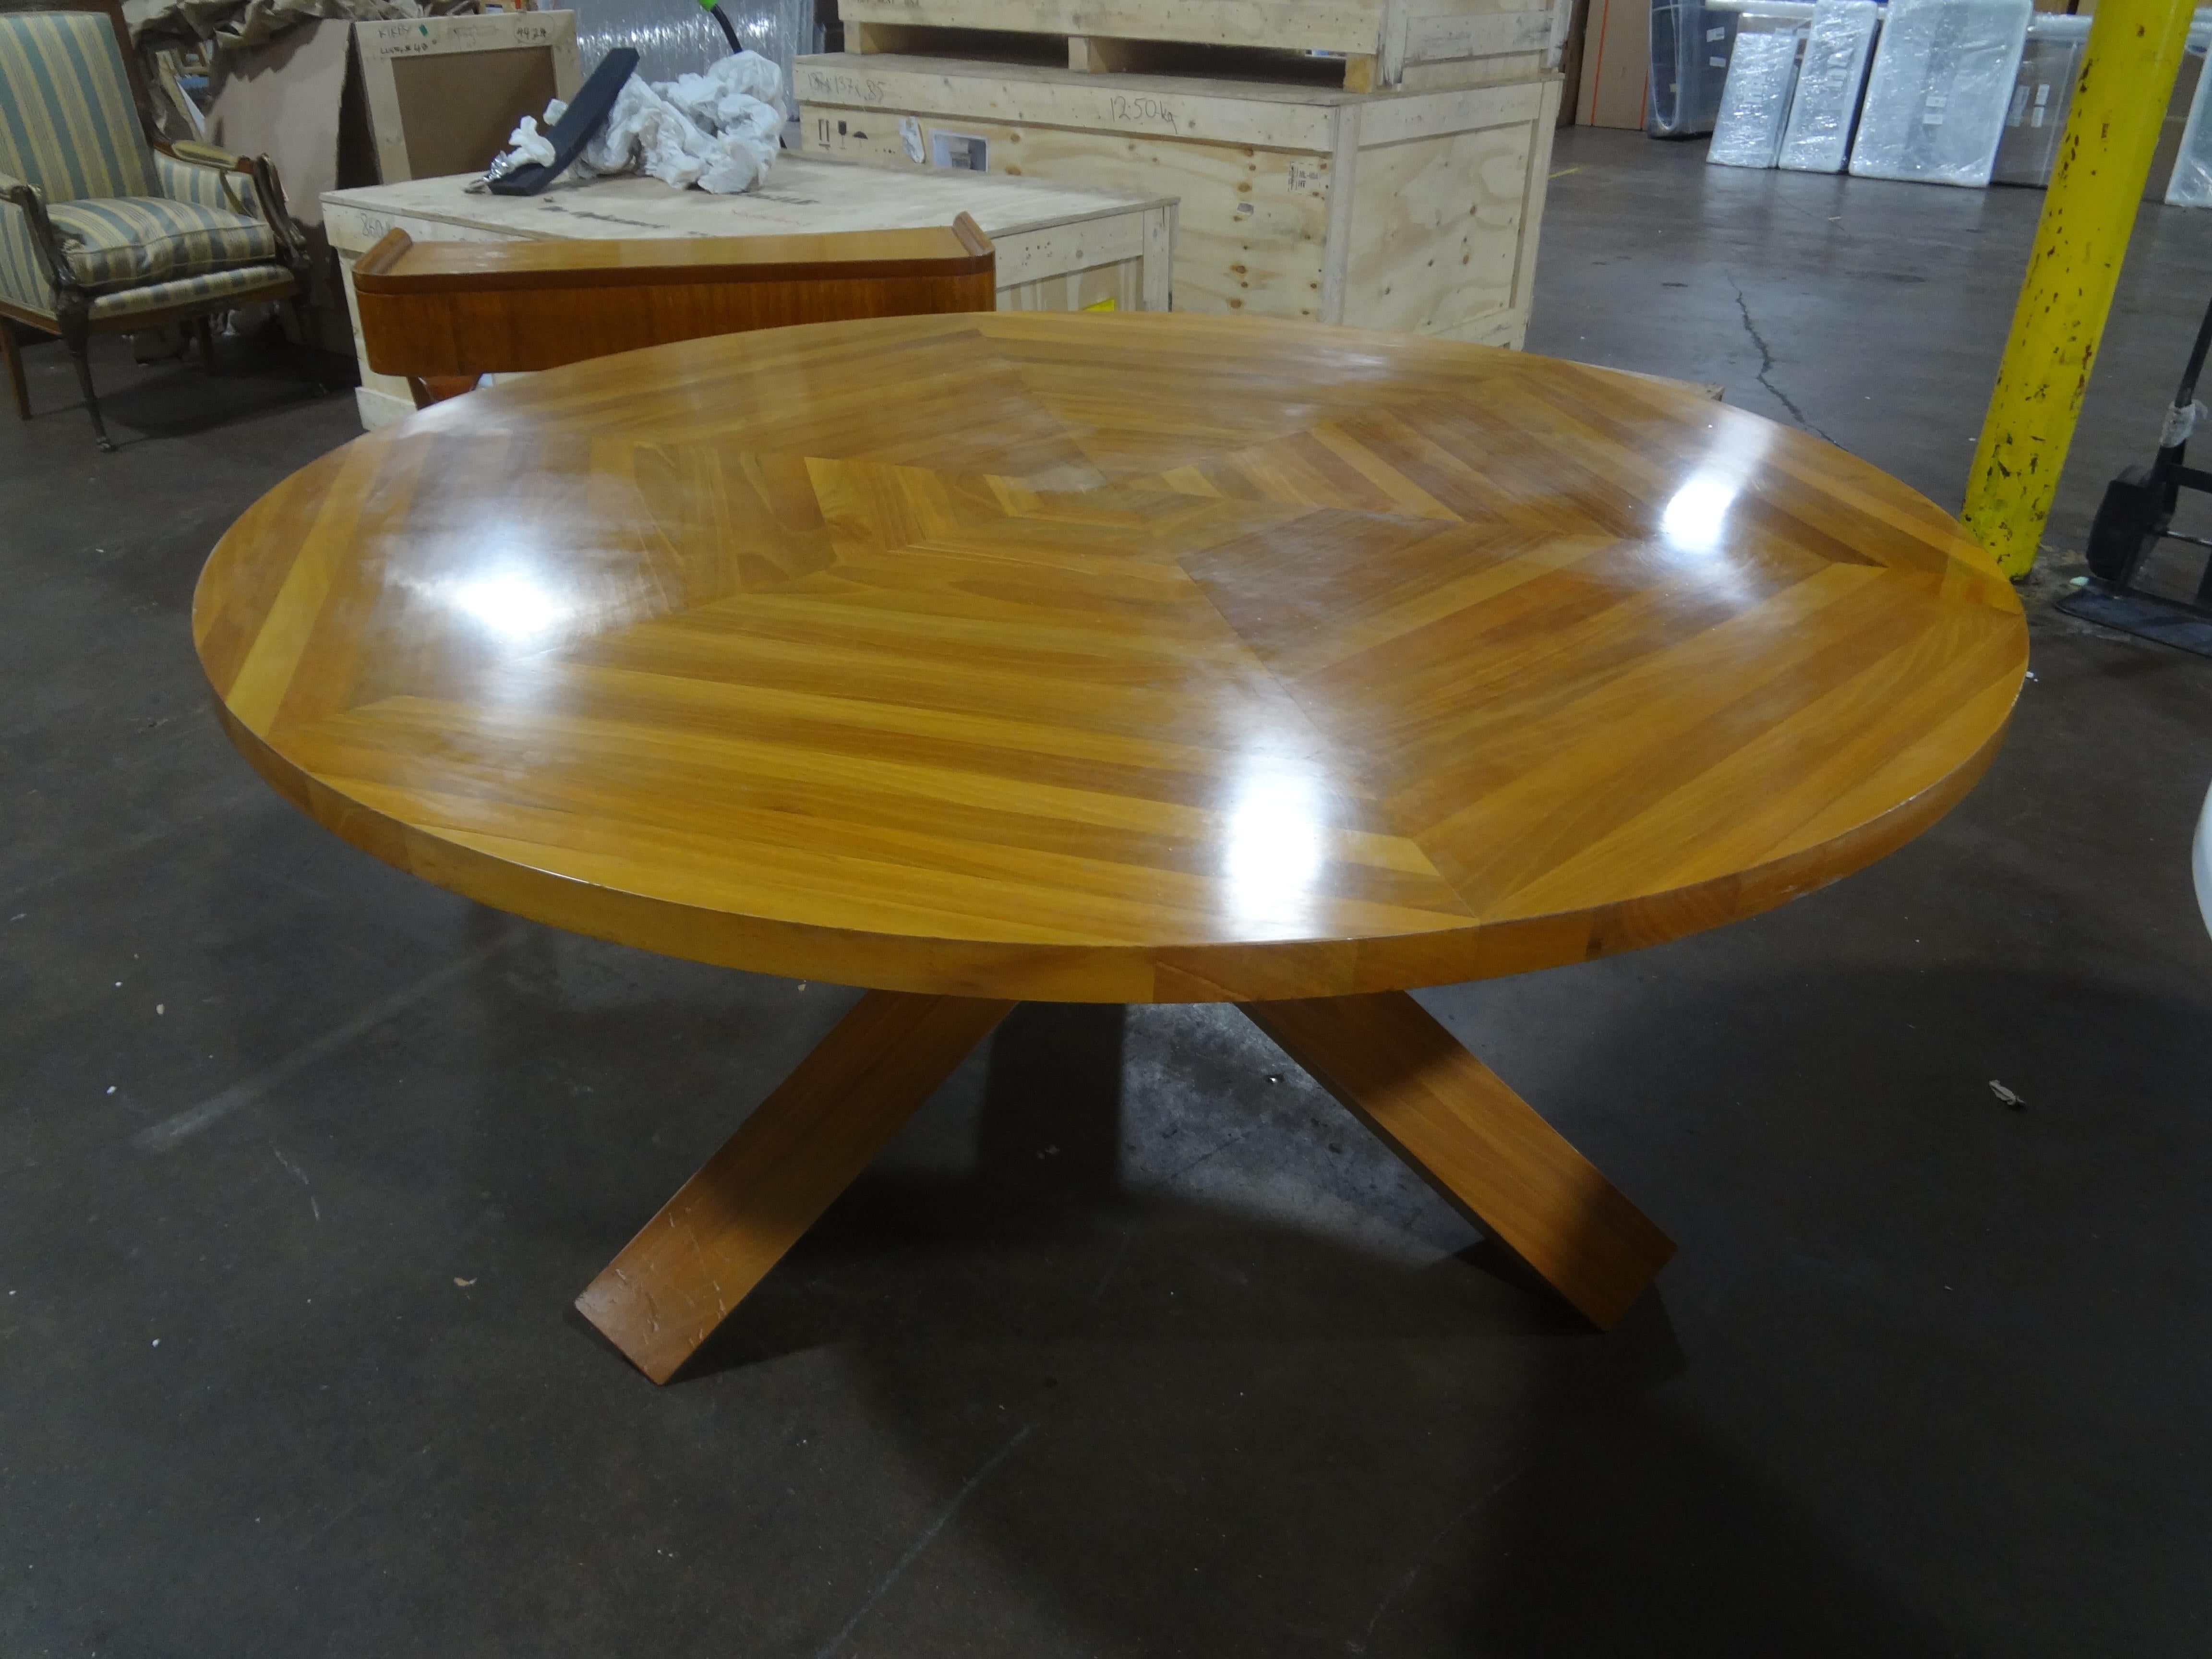 Late 20th Century Italian Modern Tripod Center Table Or Dining Table By Cassina For Sale